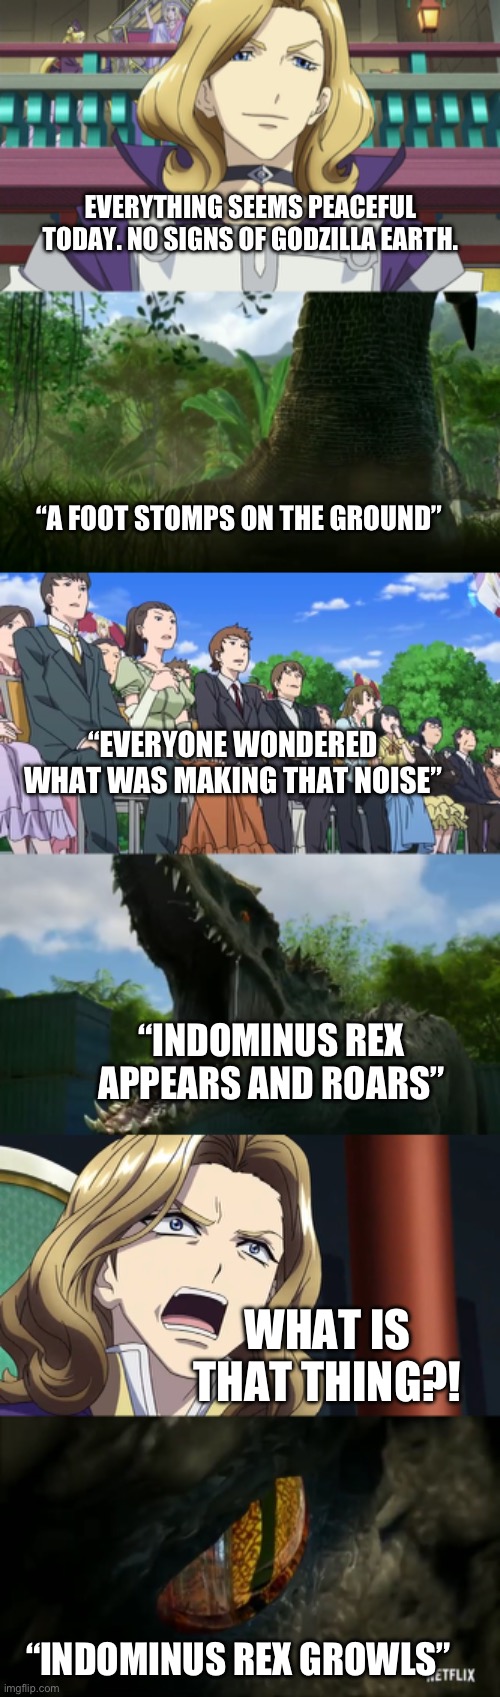 Return of the Hybrid | EVERYTHING SEEMS PEACEFUL TODAY. NO SIGNS OF GODZILLA EARTH. “A FOOT STOMPS ON THE GROUND”; “EVERYONE WONDERED WHAT WAS MAKING THAT NOISE”; “INDOMINUS REX APPEARS AND ROARS”; WHAT IS THAT THING?! “INDOMINUS REX GROWLS” | image tagged in crossover | made w/ Imgflip meme maker